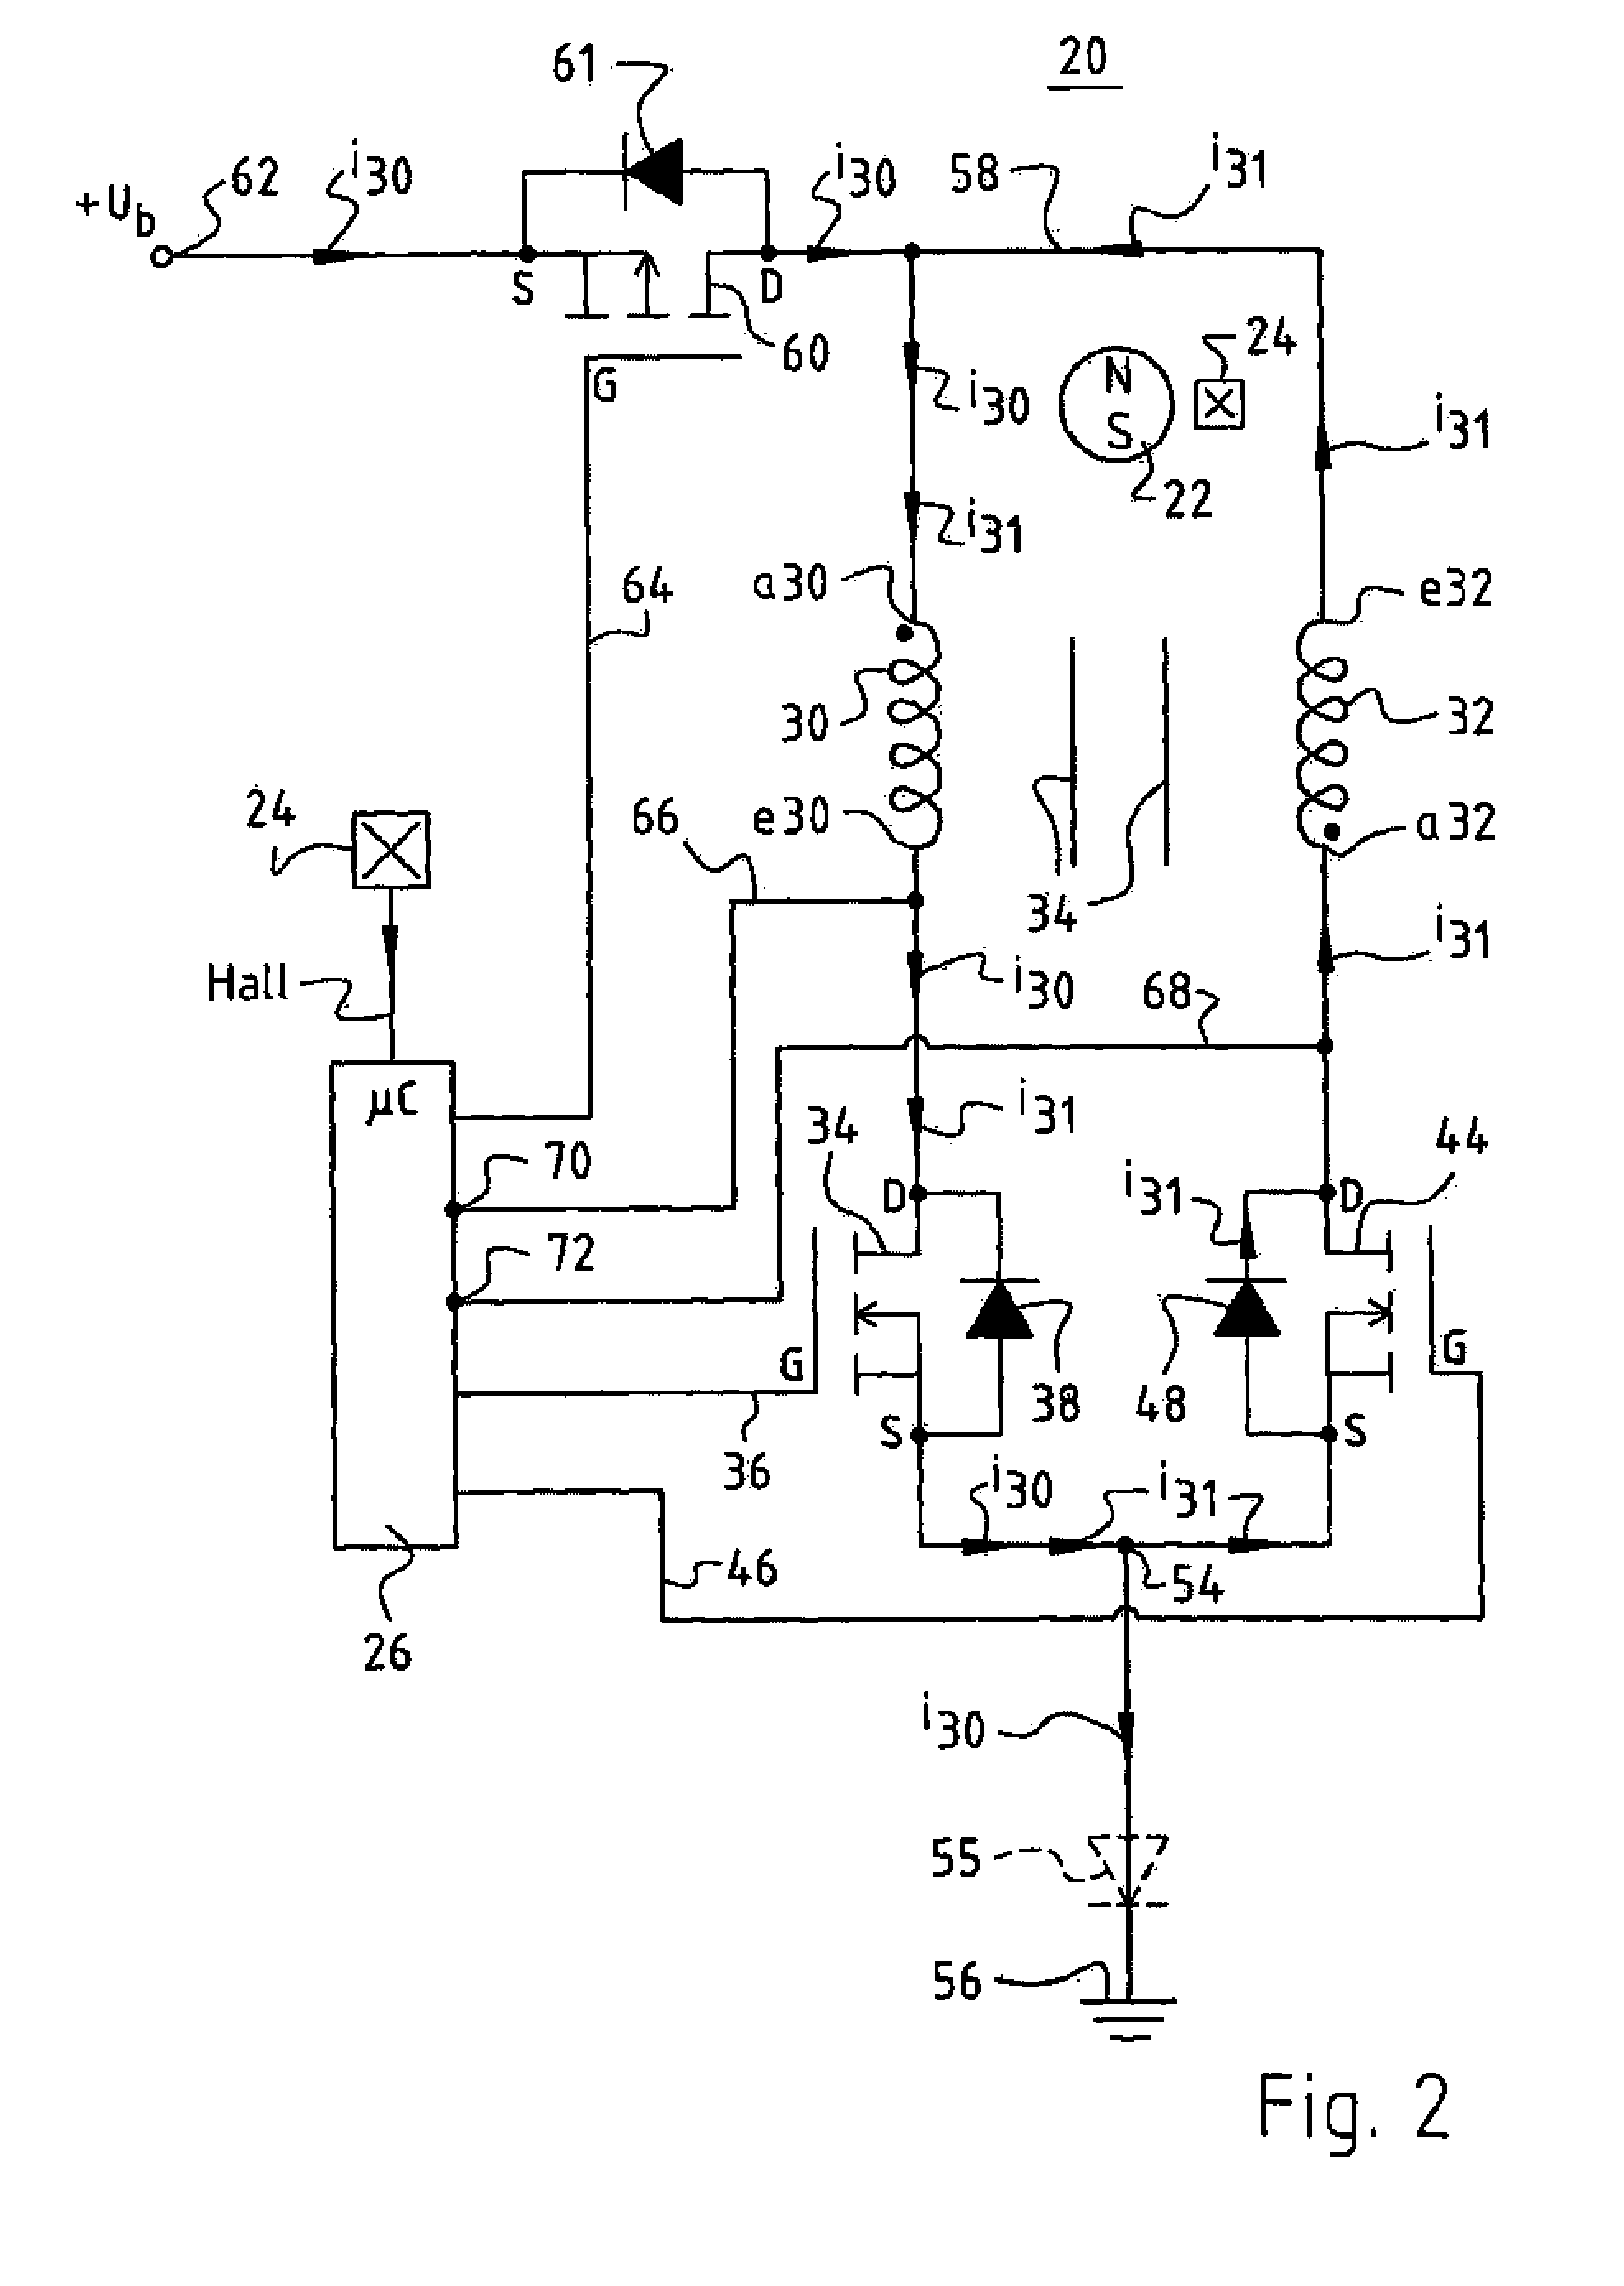 Method for Operating an Electronically Commutated Motor, and Motor for Carrying Out a Method Such as This